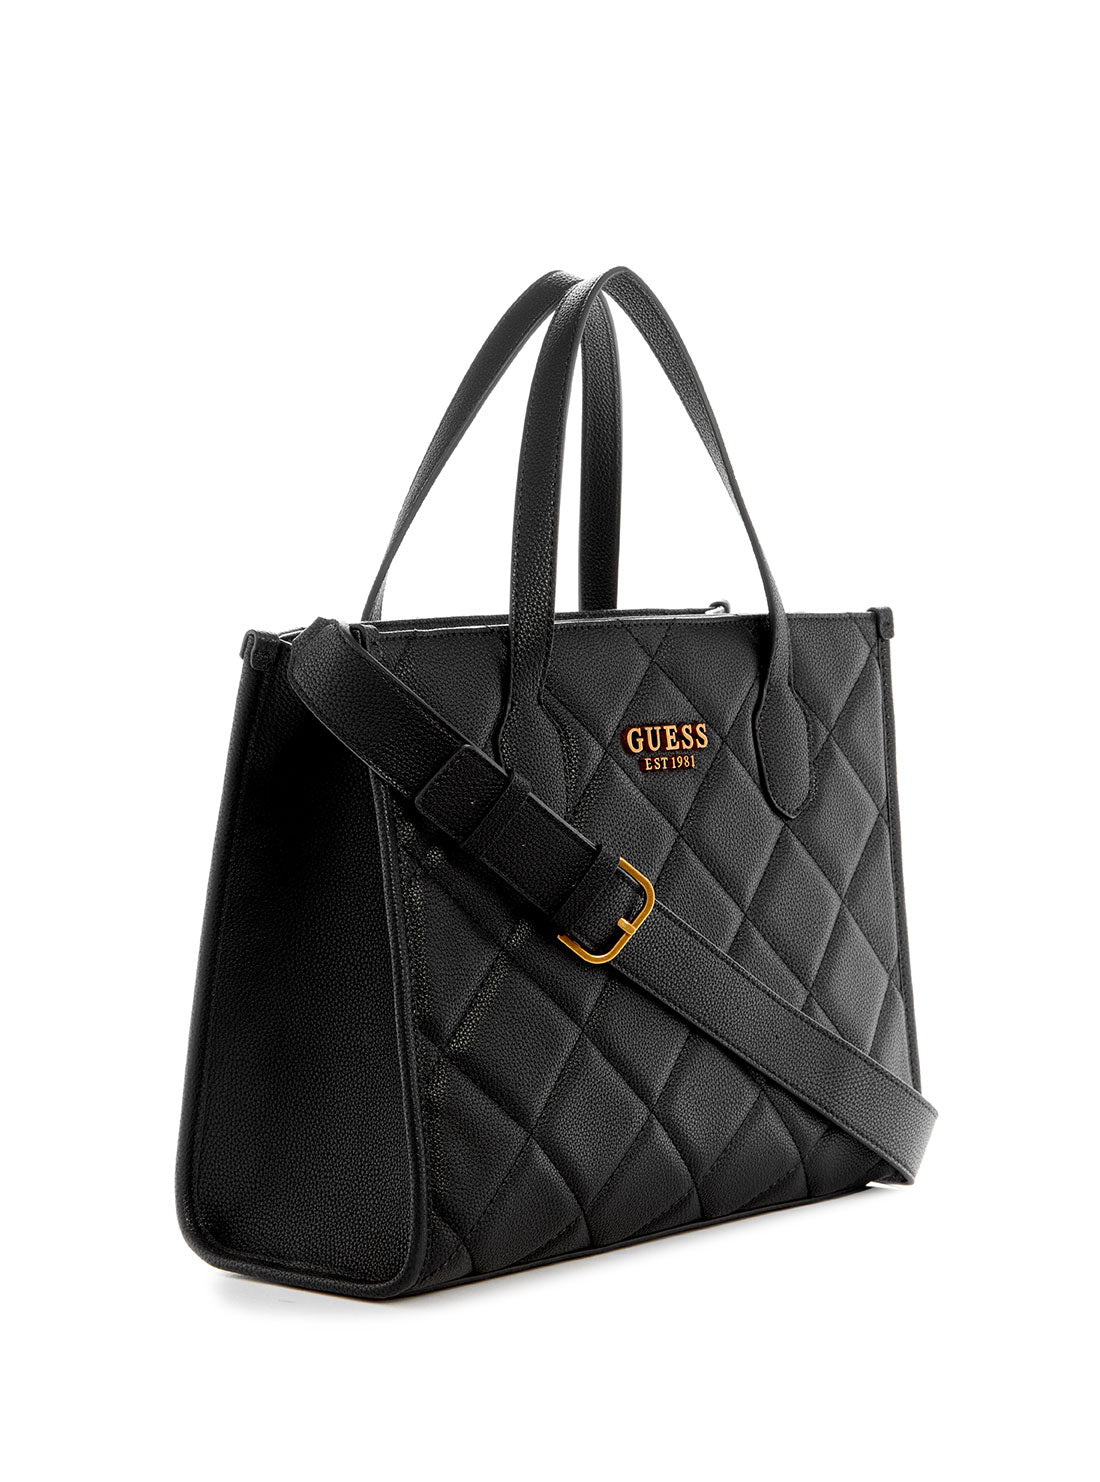 guess womens Black Quilted Silvana Tote Bag side view